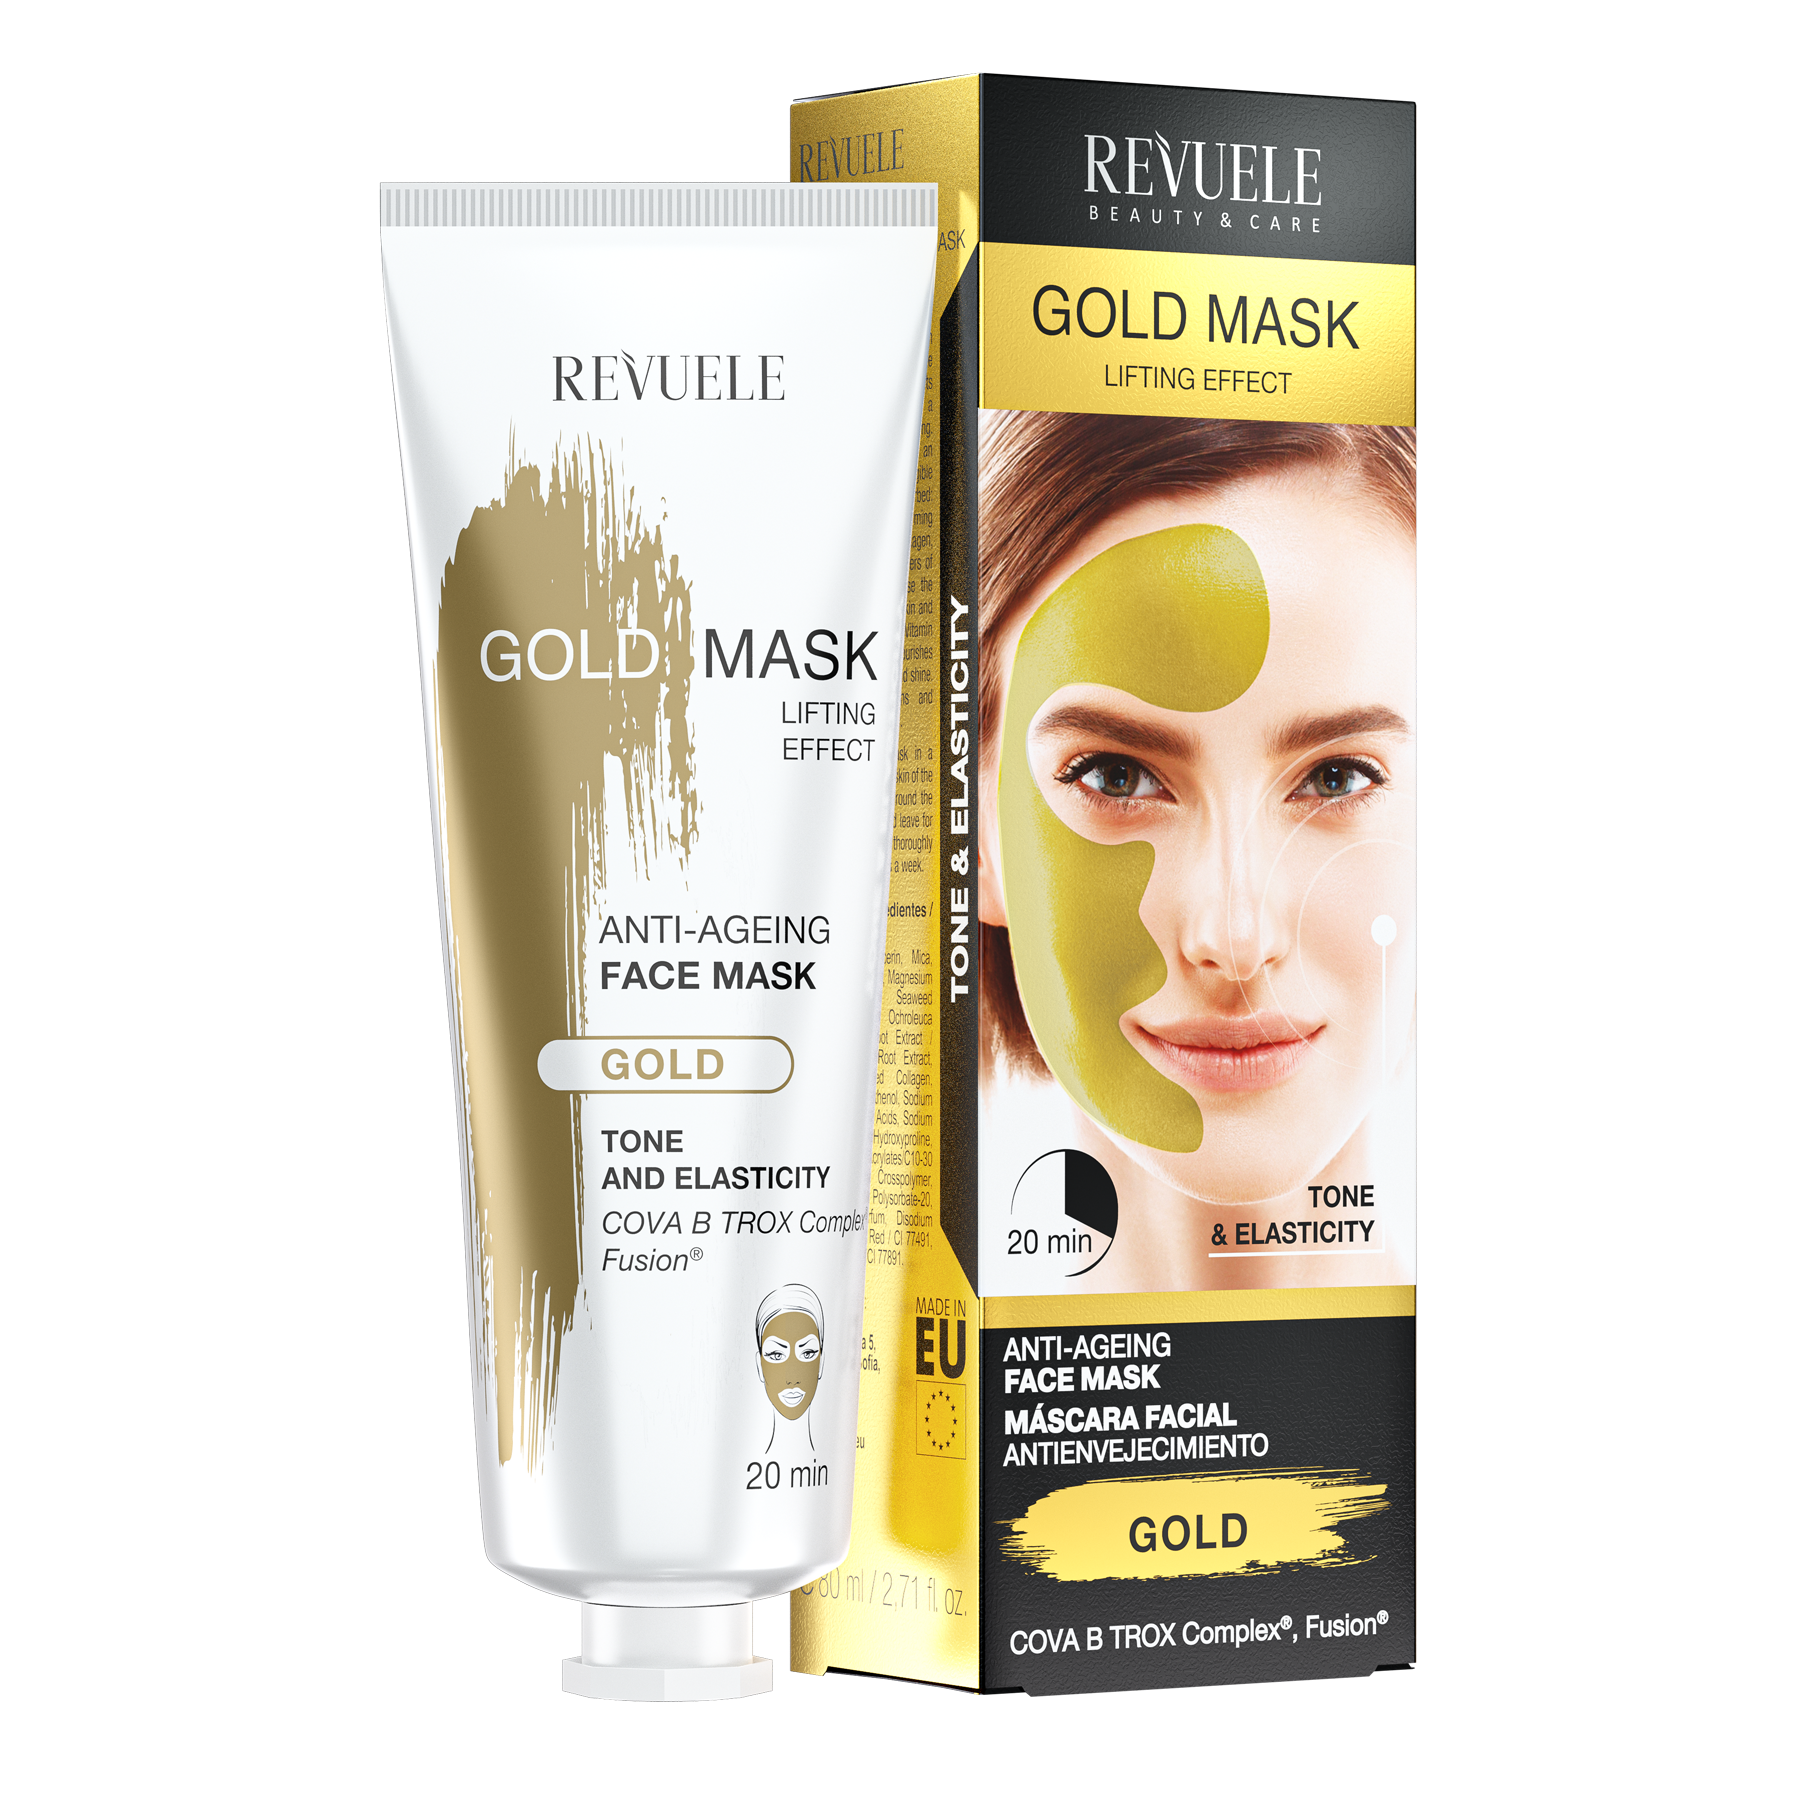 Revuele Gold Mask Lifting Effect GOLD